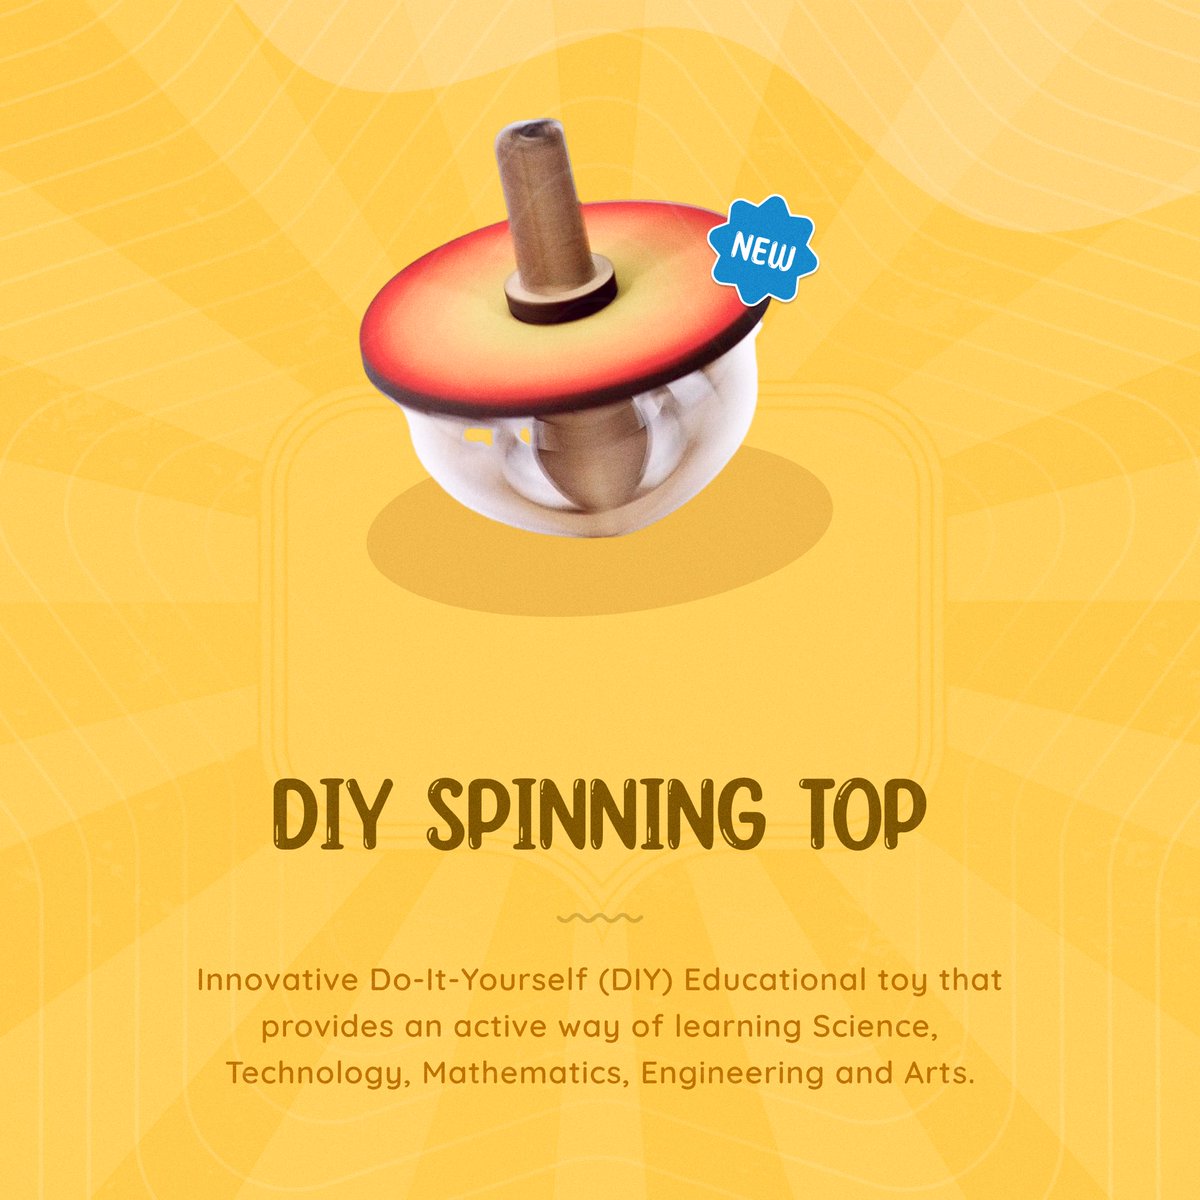 Spinning Tops: Ancient wonders to modern whirlers, see how the spin has spun🤪😎 #spinningtop #rowan #rowanindia #toys #fungames #kids #evolution #timetravel